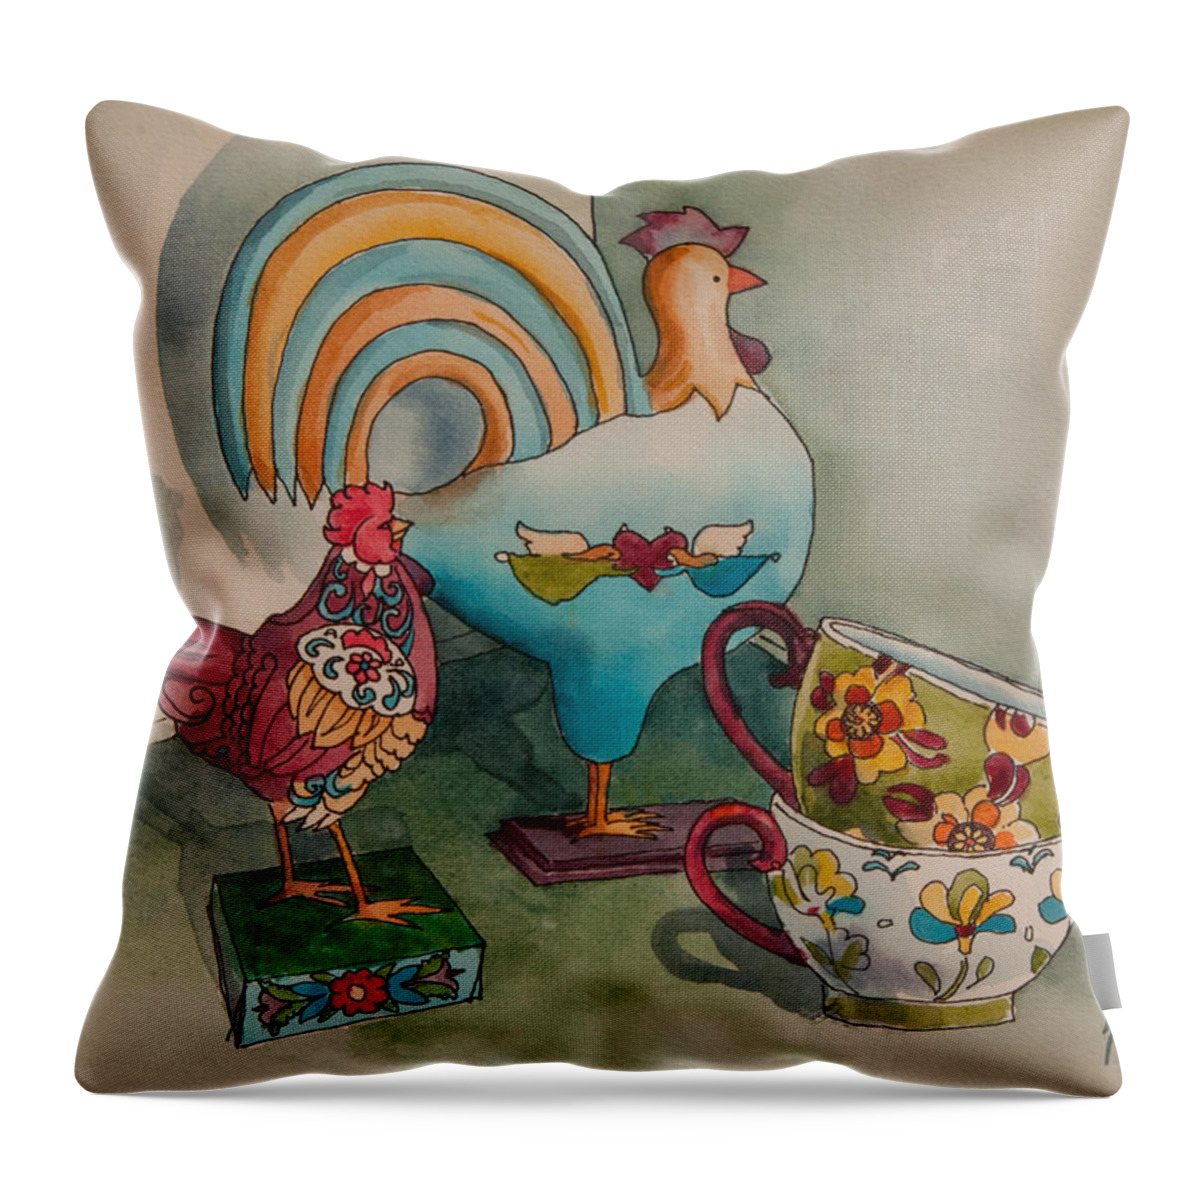 Still Life Throw Pillow featuring the painting Linda's Chickens II by Heidi E Nelson